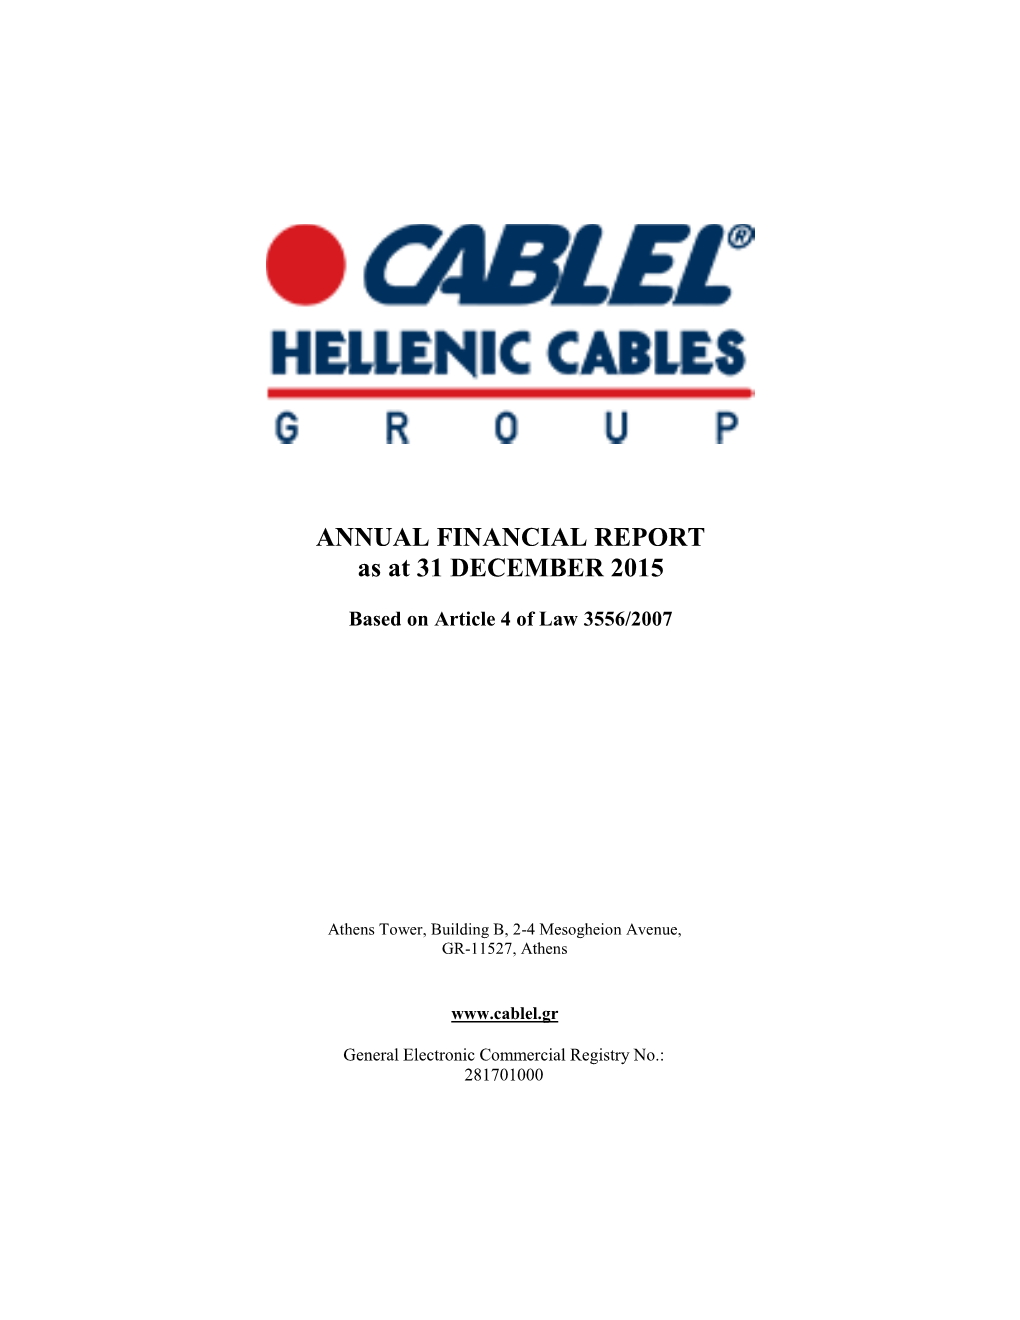 ANNUAL FINANCIAL REPORT As at 31 DECEMBER 2015